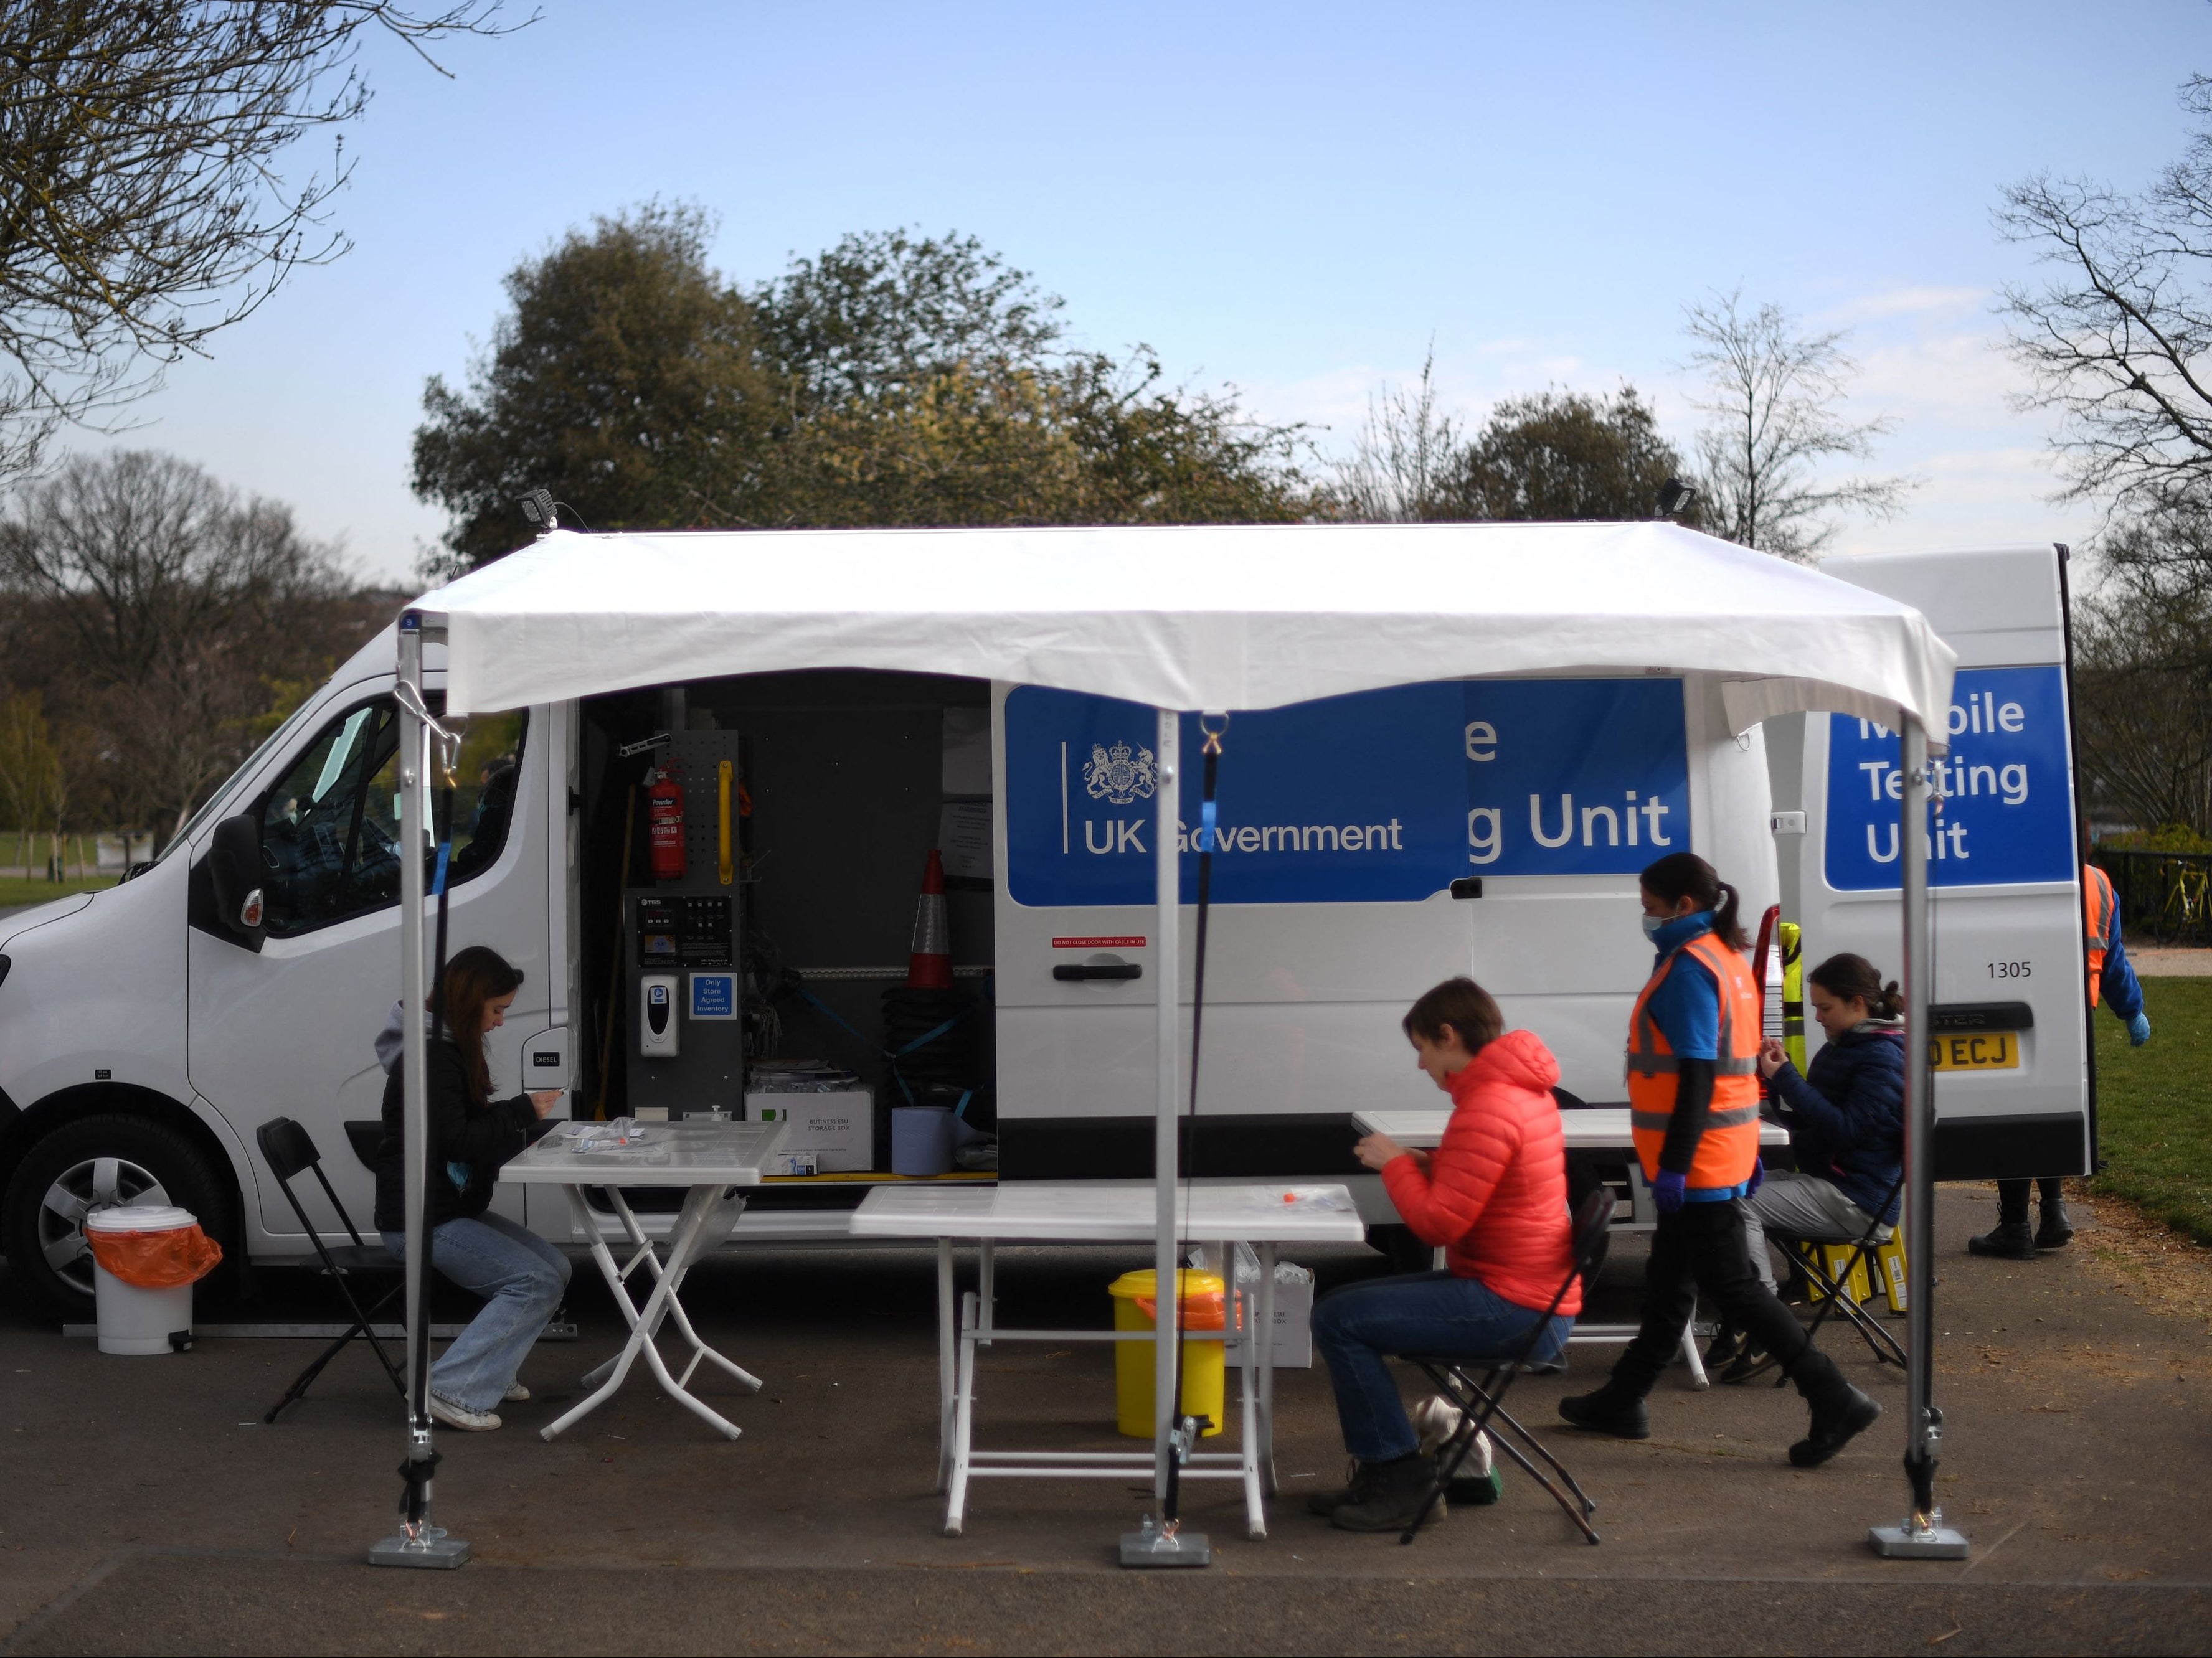 A mobile testing unit will be set up in Finchley Central Station after a case of the South African variant of Covid-19 was detected in the London borough of Barnet